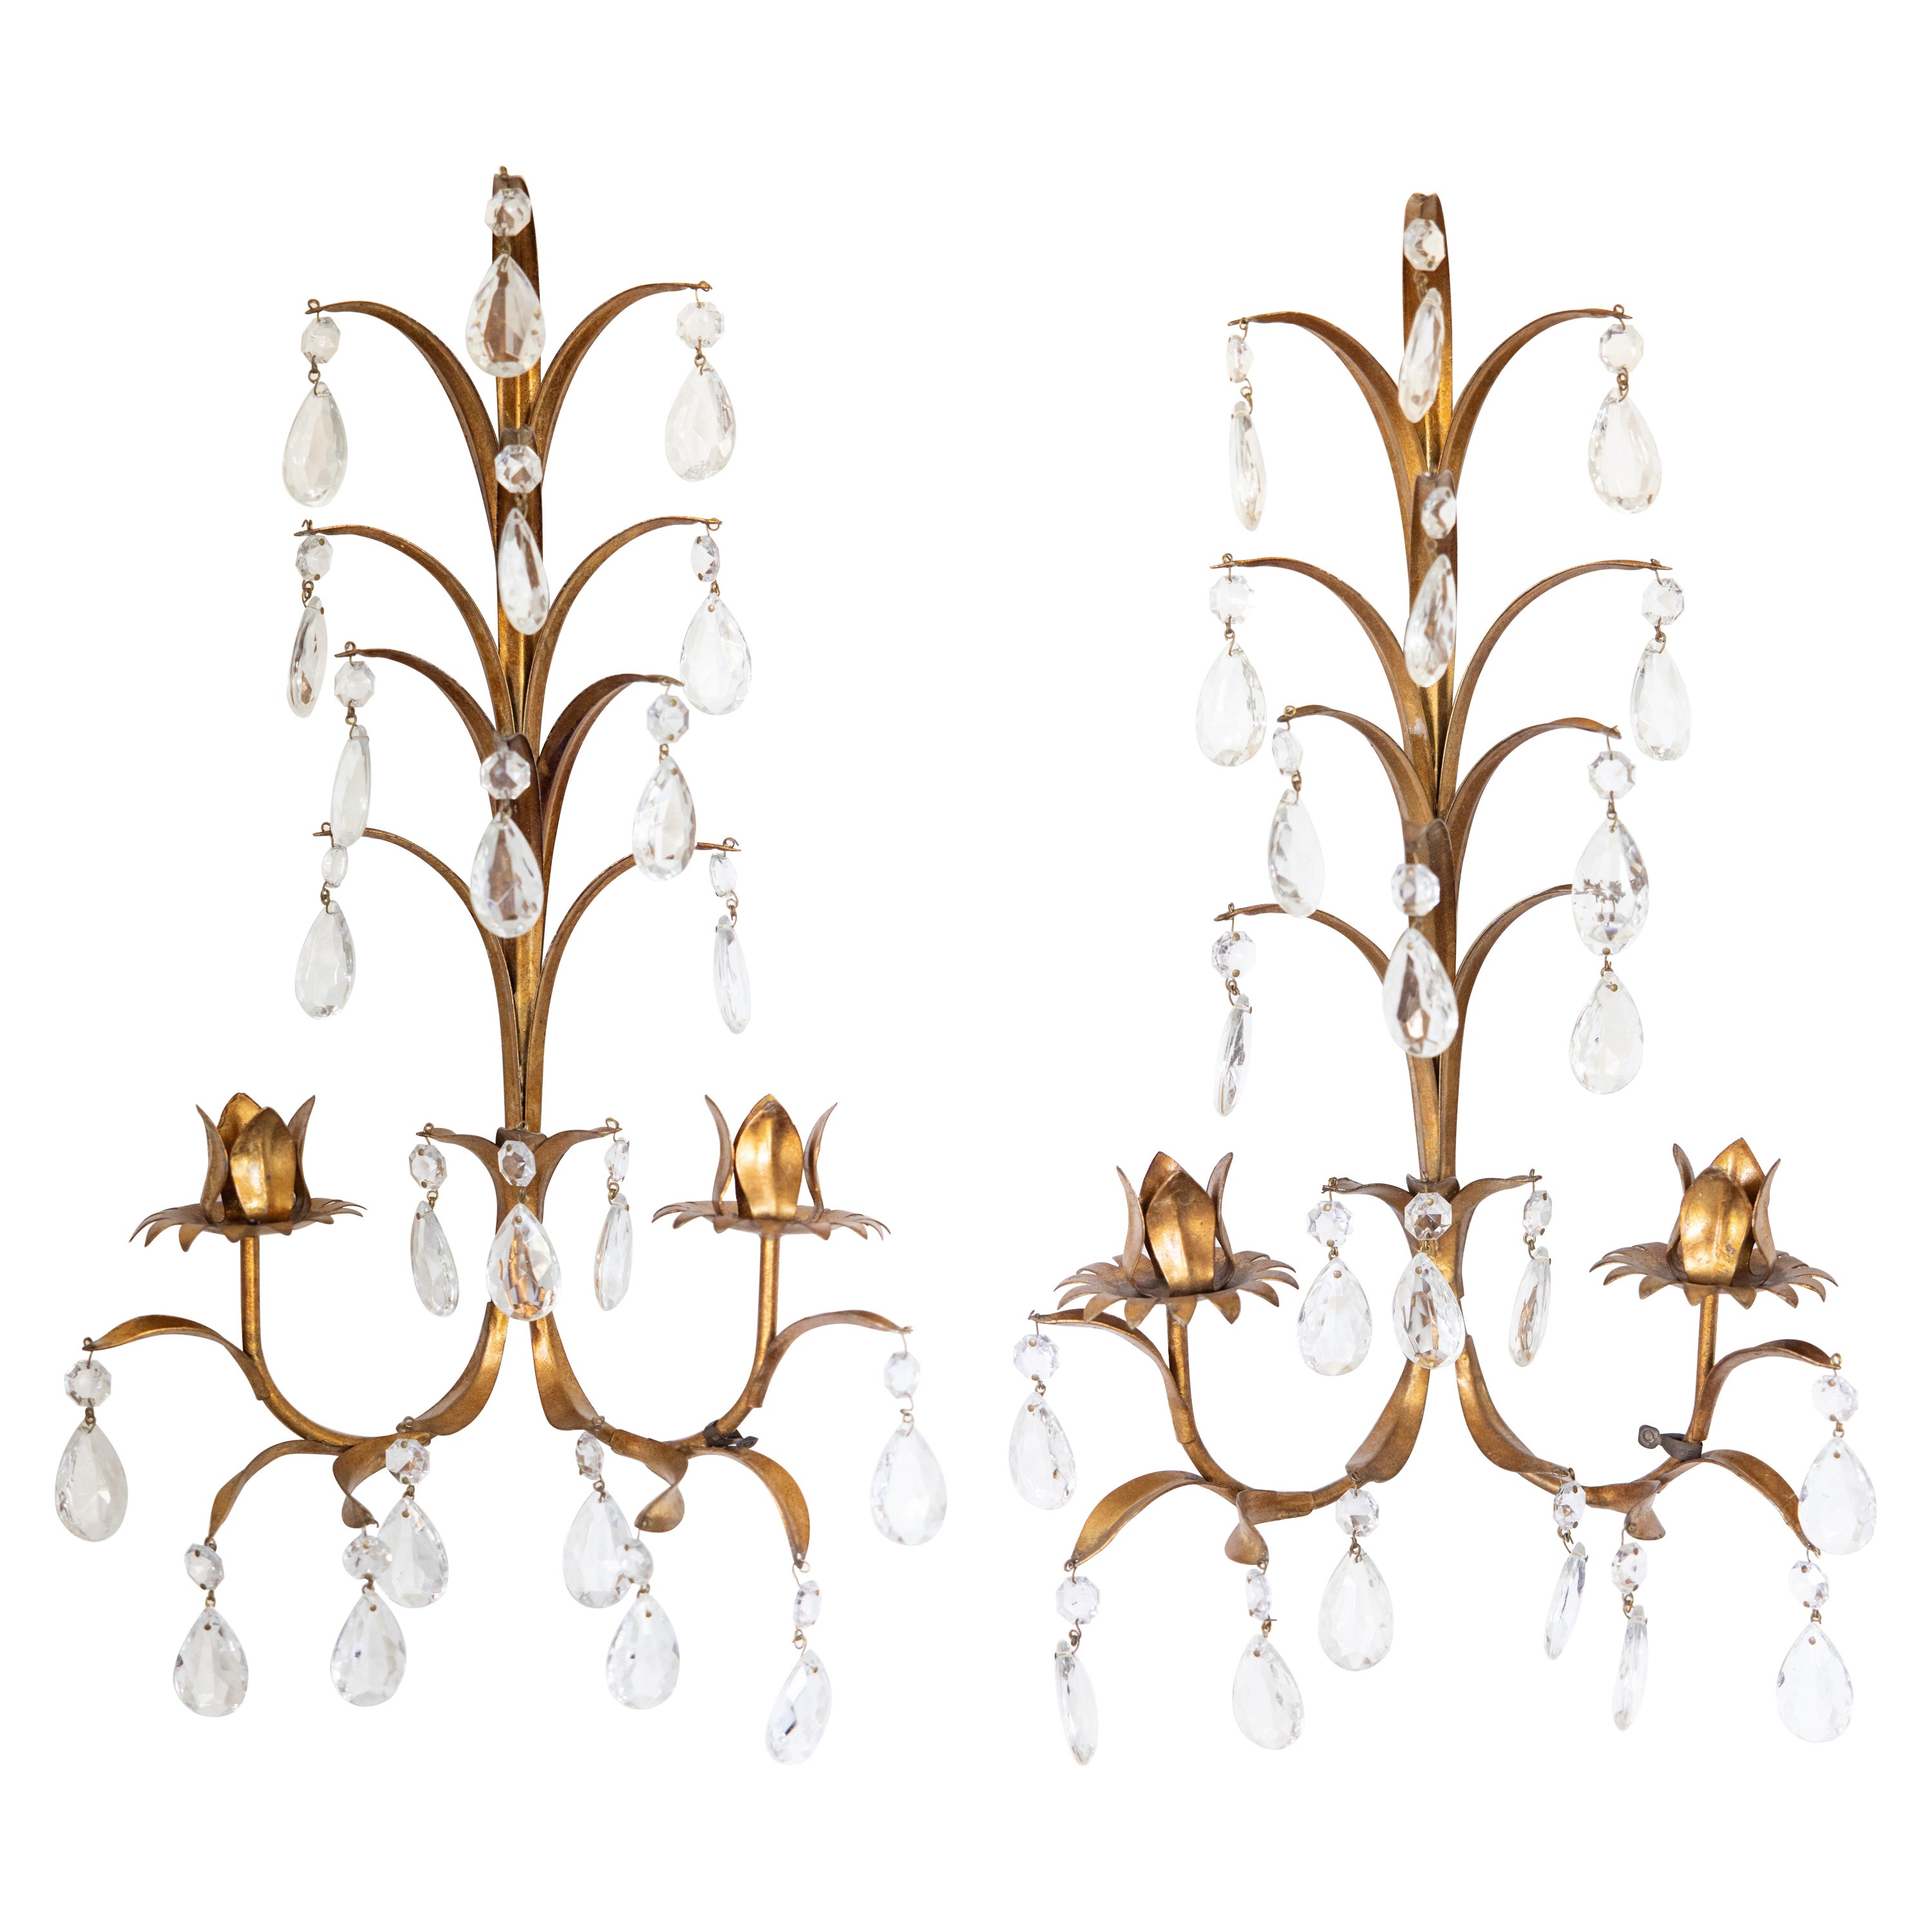 Pair of Mid 20th Century Italian Gilt Tole & Crystals Candelabra Candle Sconces For Sale